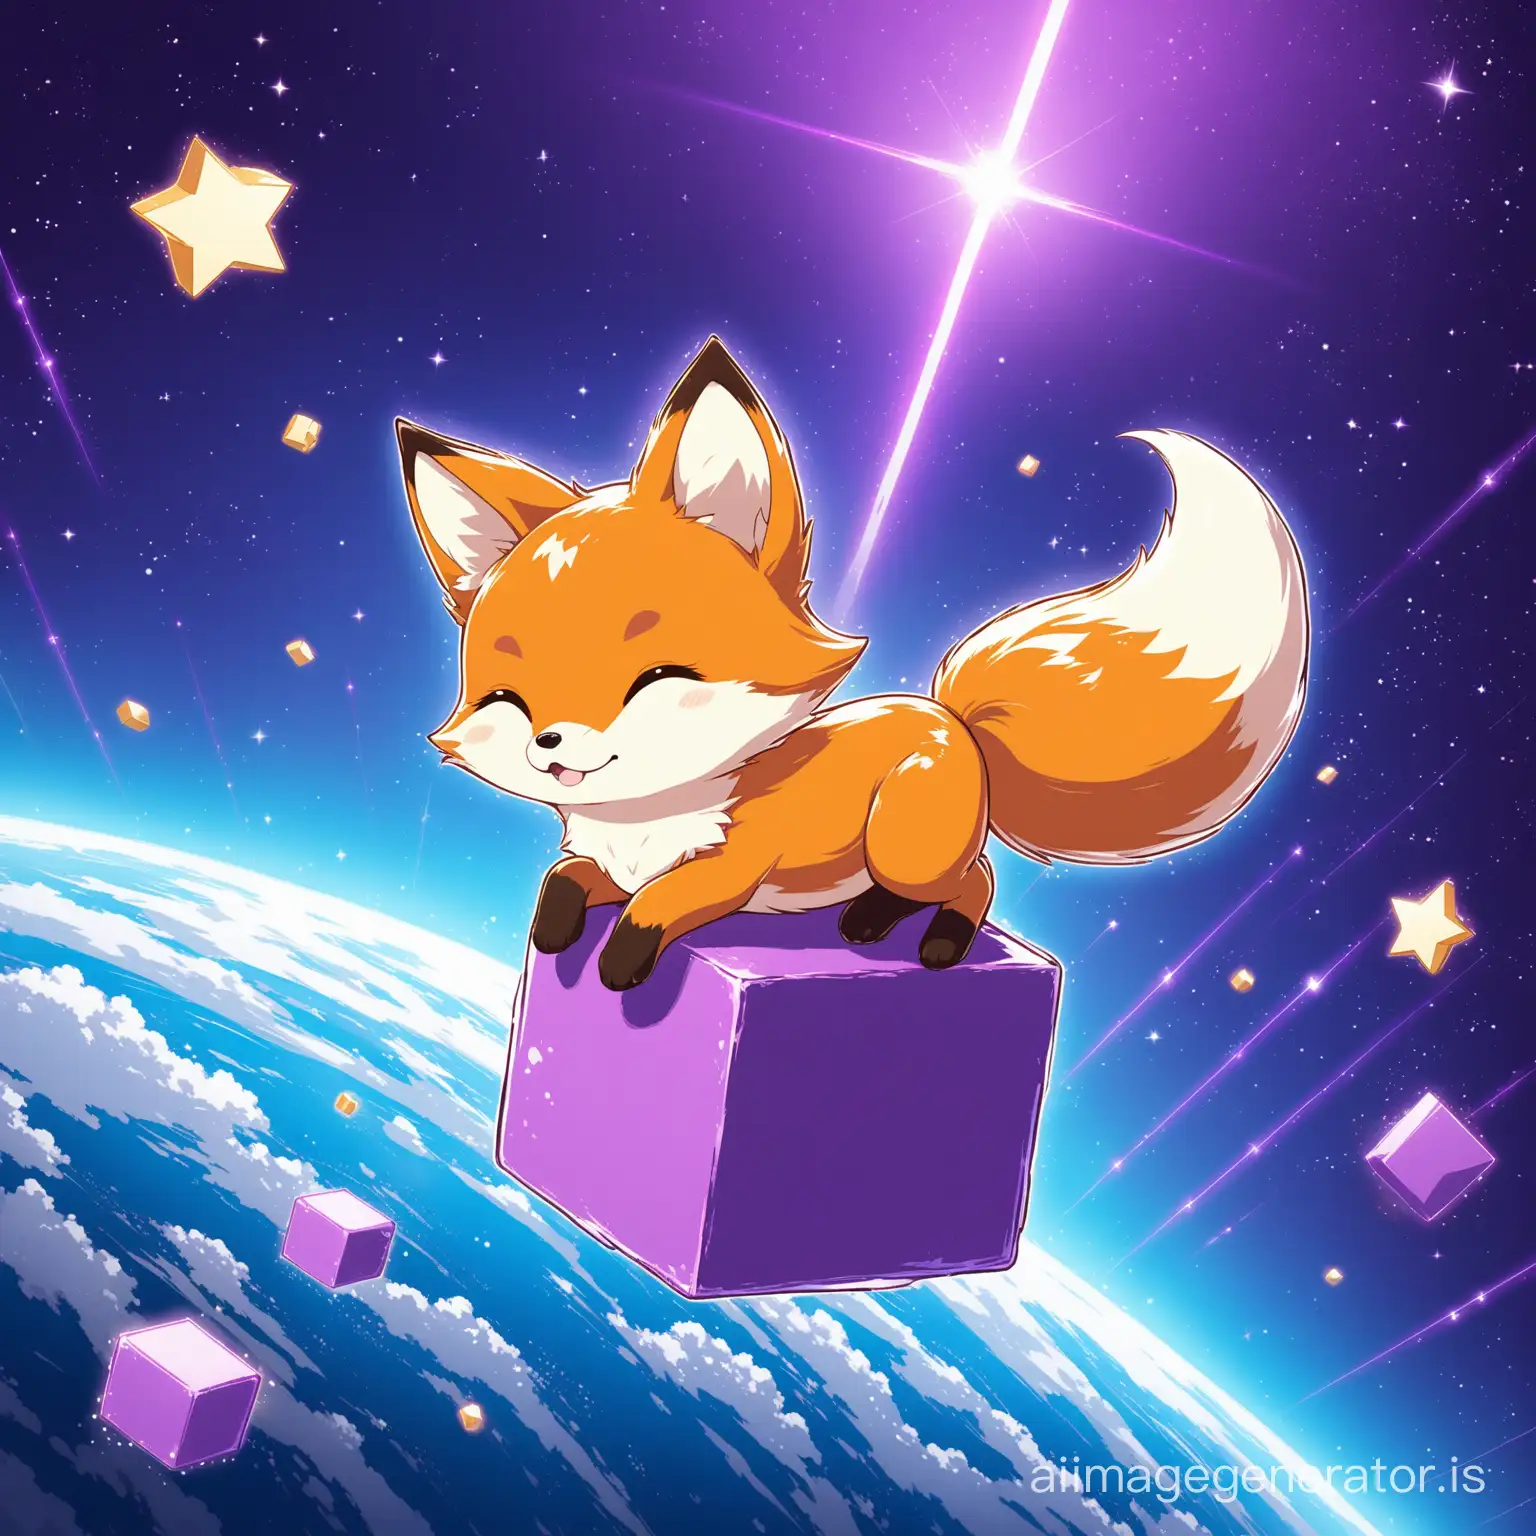 Adorable-Fox-Riding-a-Purple-Flying-Block-Over-Earth